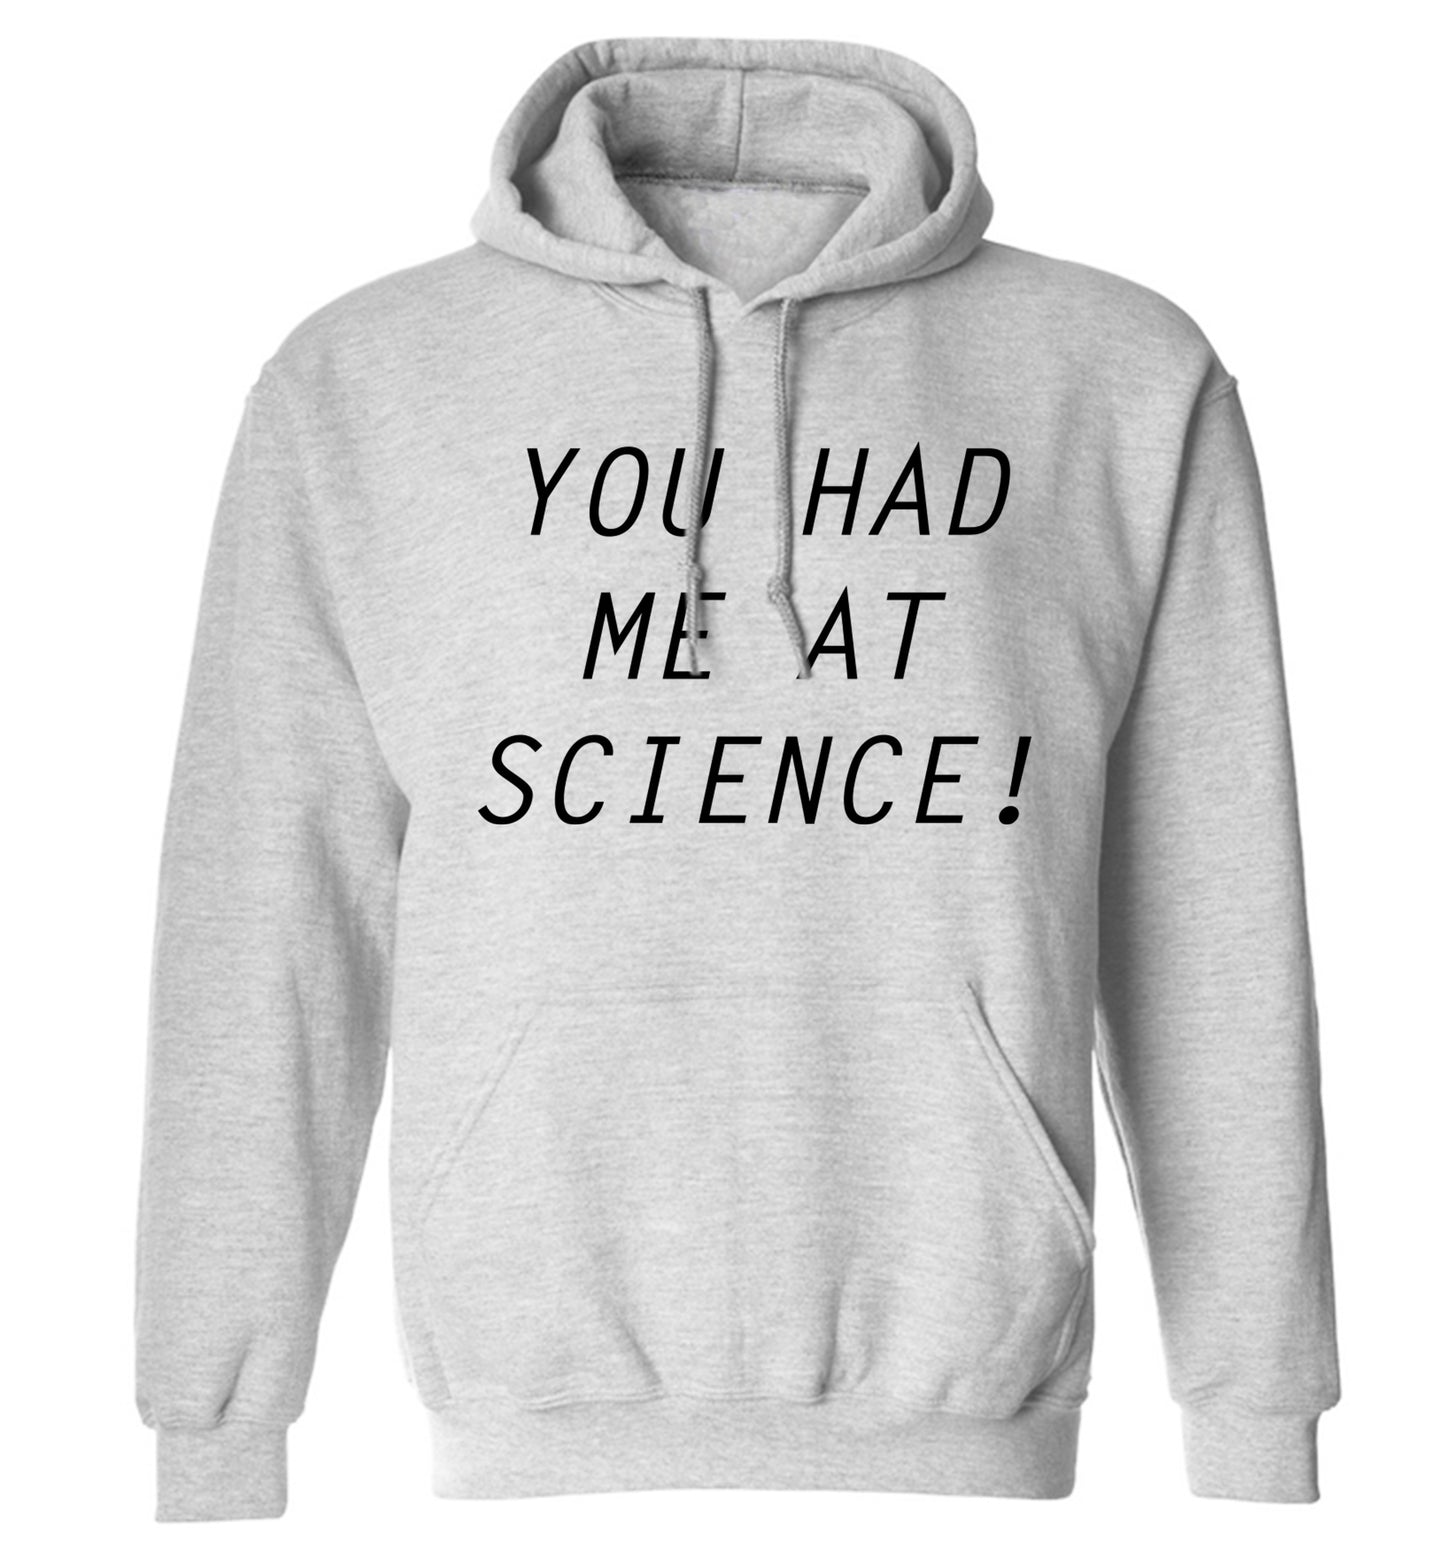 You had me at science adults unisex grey hoodie 2XL